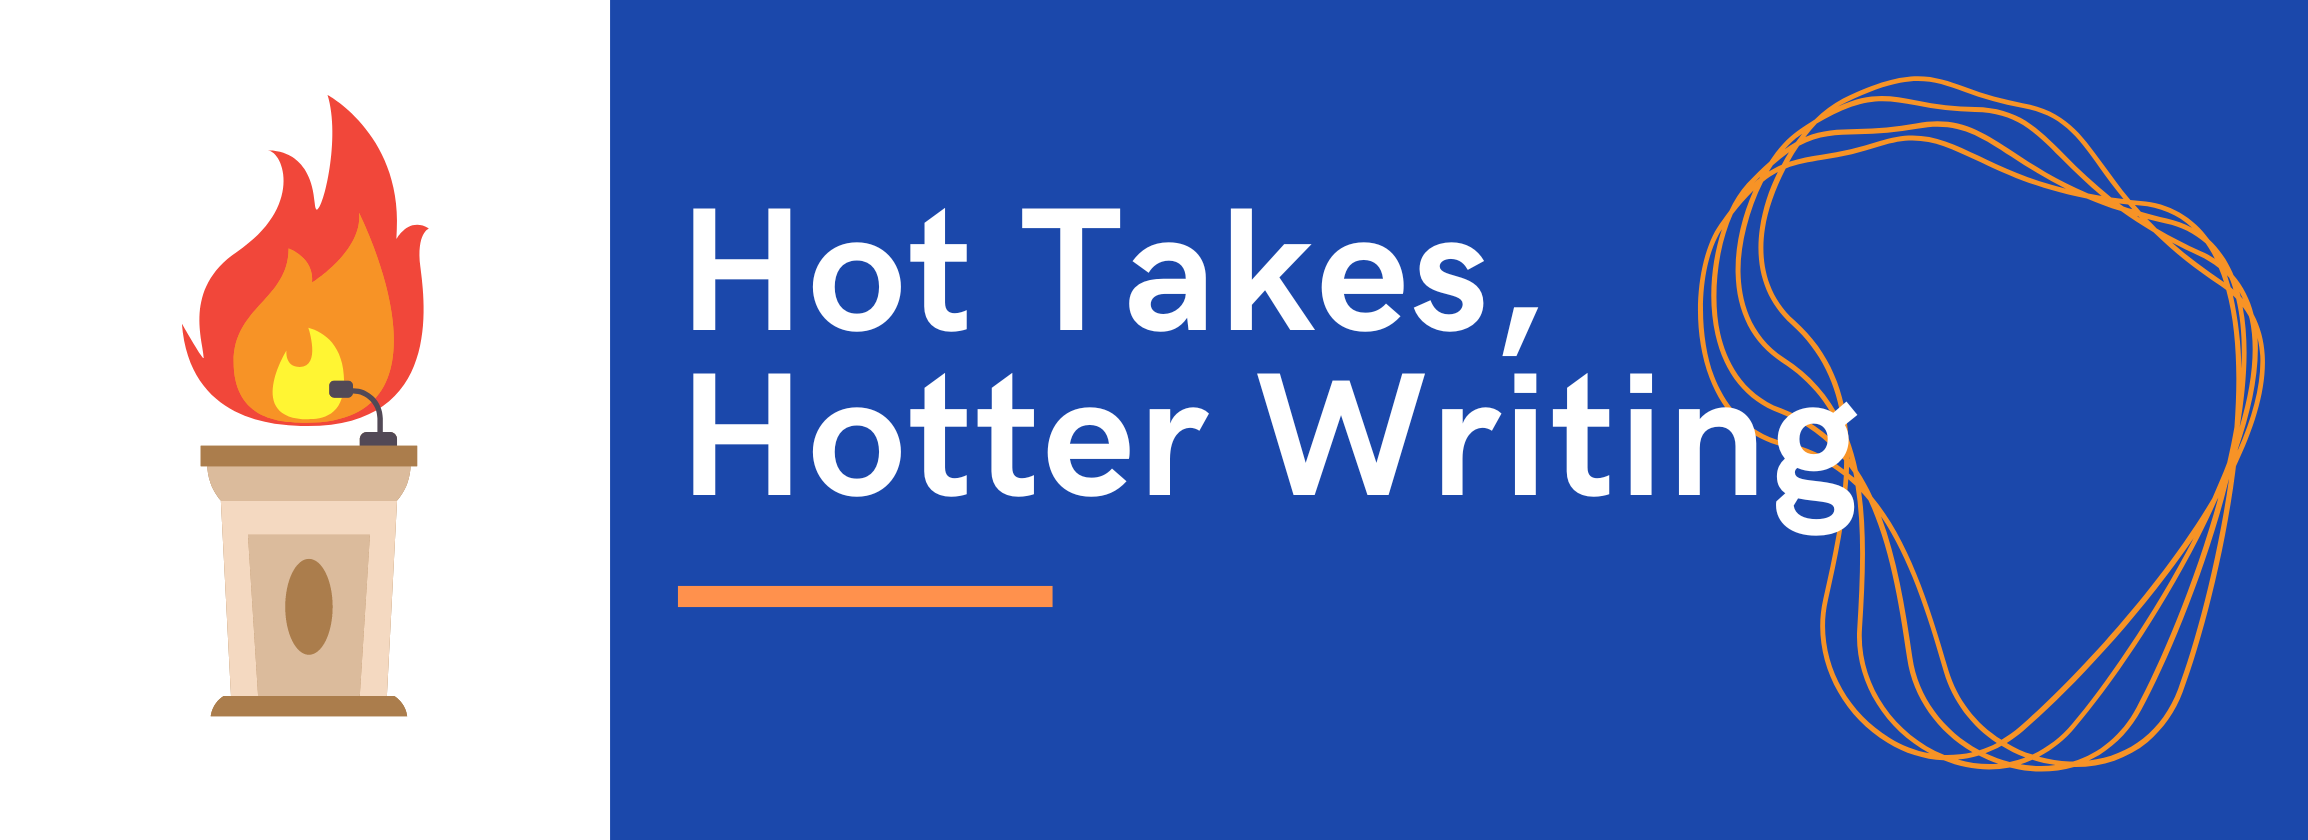 Hot Takes, Hotter Writing